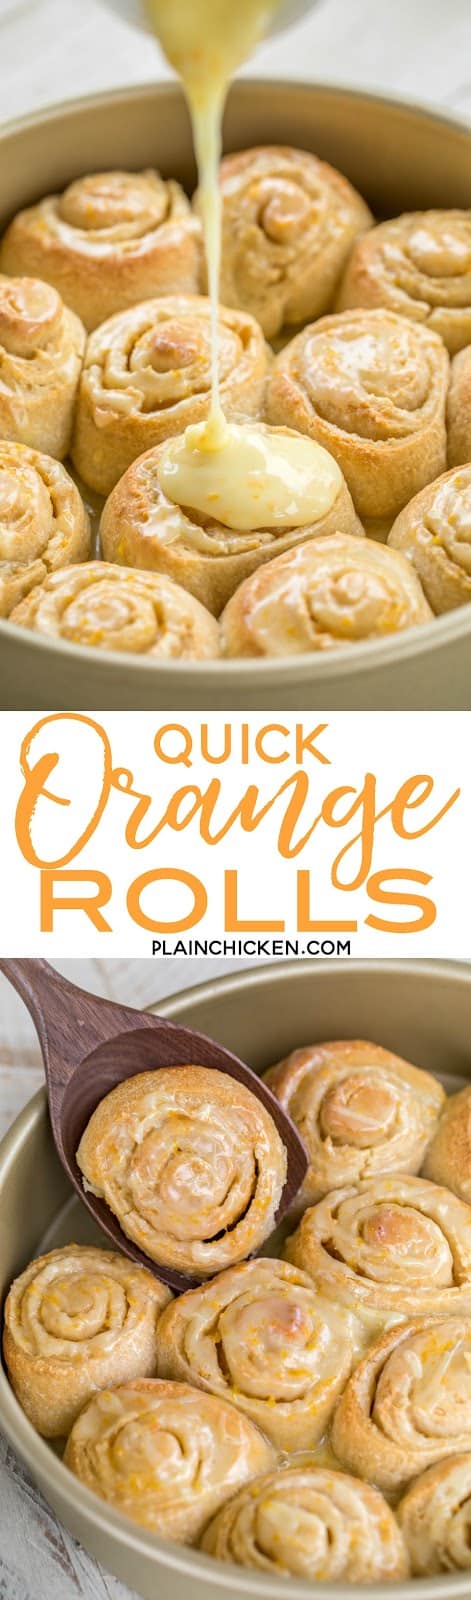 Quick Orange Rolls recipe - AMAZING!!!! We eat these almost every weekend. They are so good! Ready from start to finish in about 30 minutes. French bread dough, cream cheese, brown sugar, orange zest, granulated sugar, powdered sugar and orange juice. You'll never buy the canned orange rolls again. These just can't be beat!!! #cinnamonrolls #breakfast #orangerolls #sweetrolls